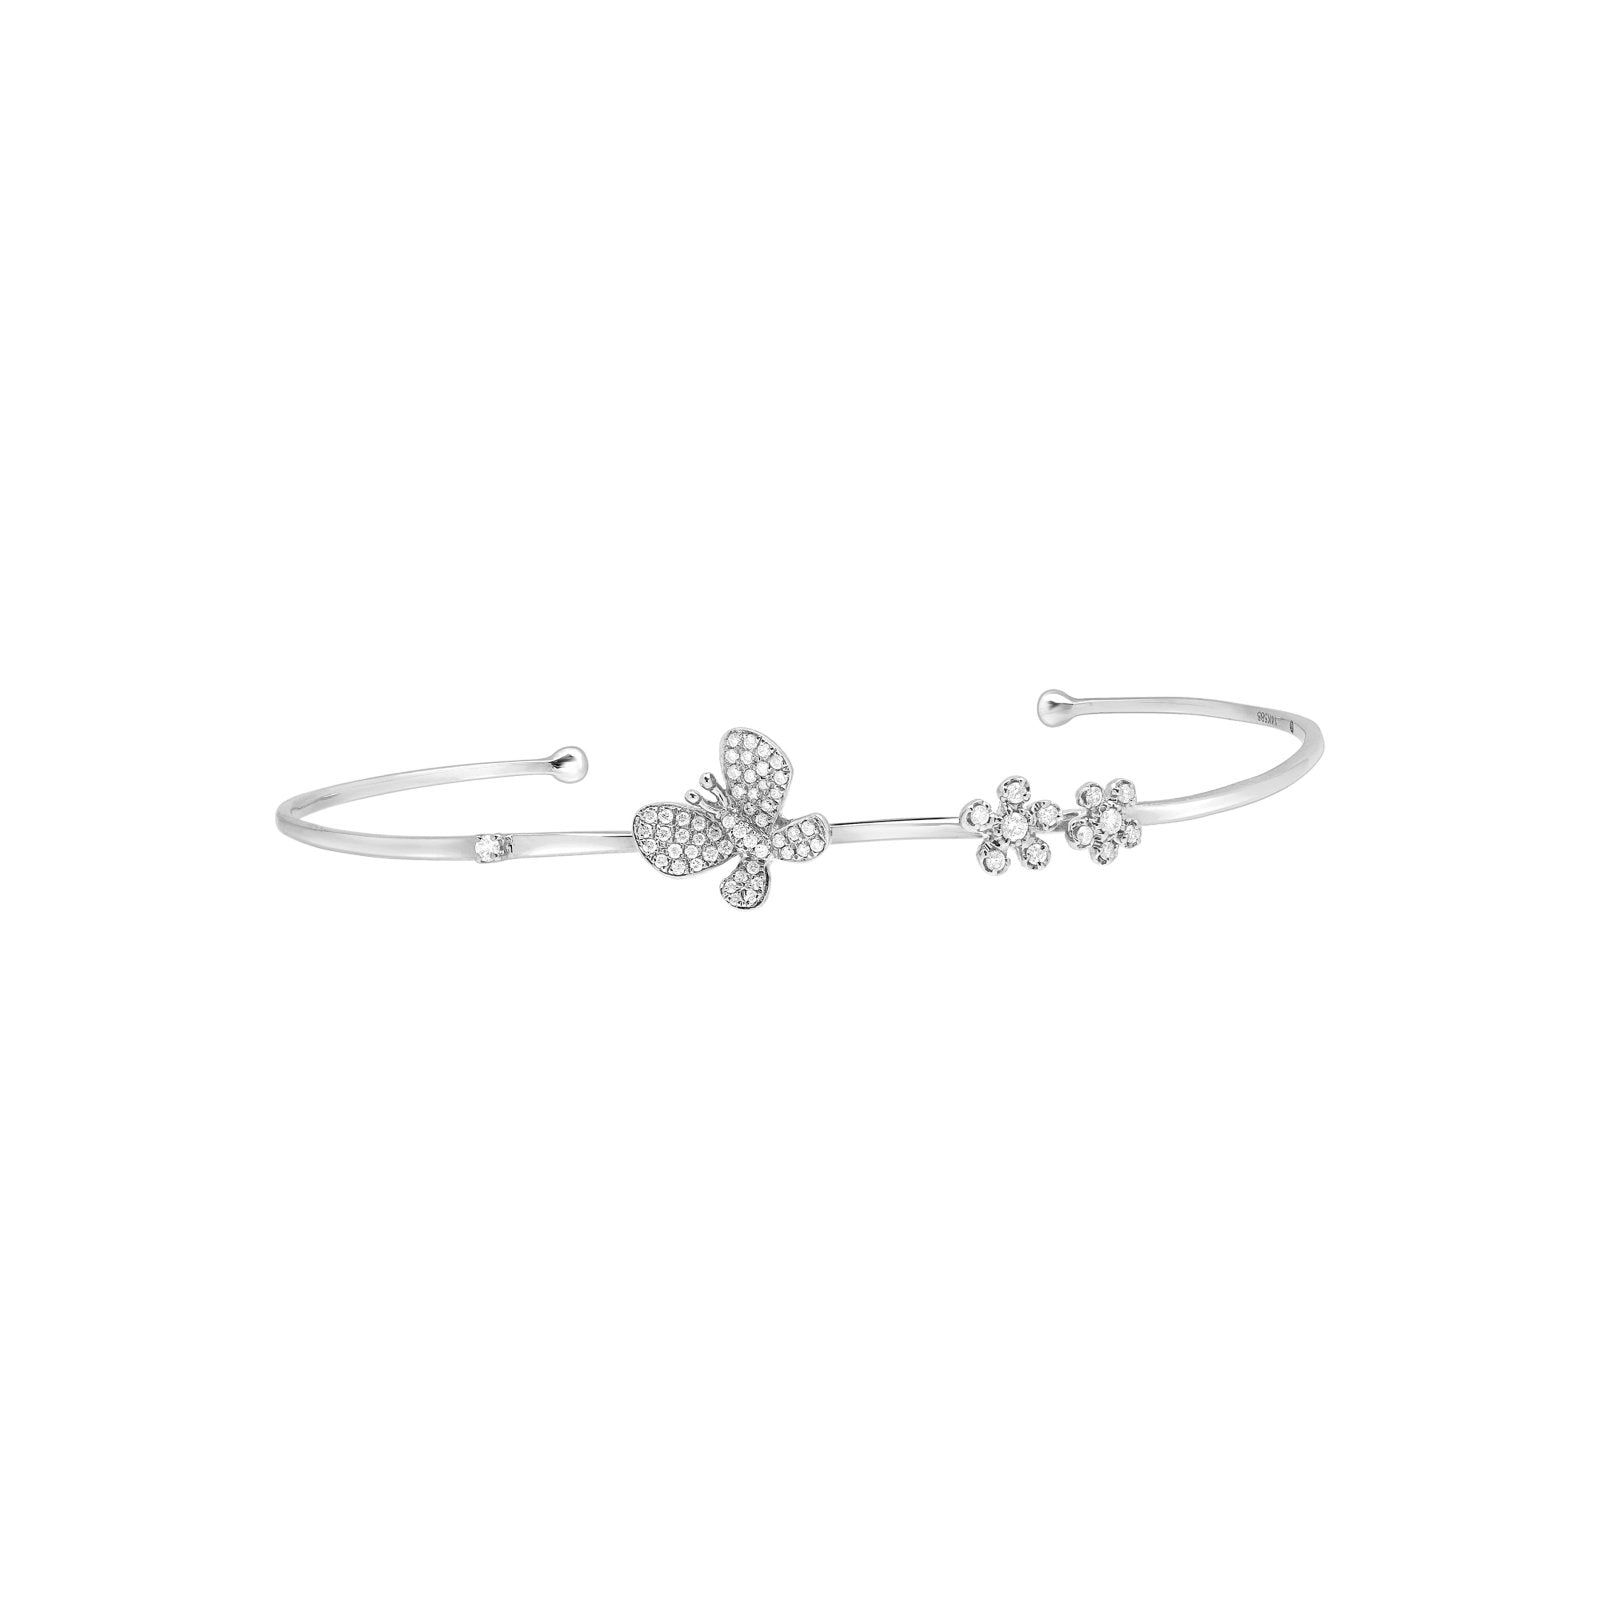 Diamond Butterfly and Flowers Garden Party Cuff Bracelets Estella Collection #product_description# 17188 14k Diamond Flower Jewelry #tag4# #tag5# #tag6# #tag7# #tag8# #tag9# #tag10#